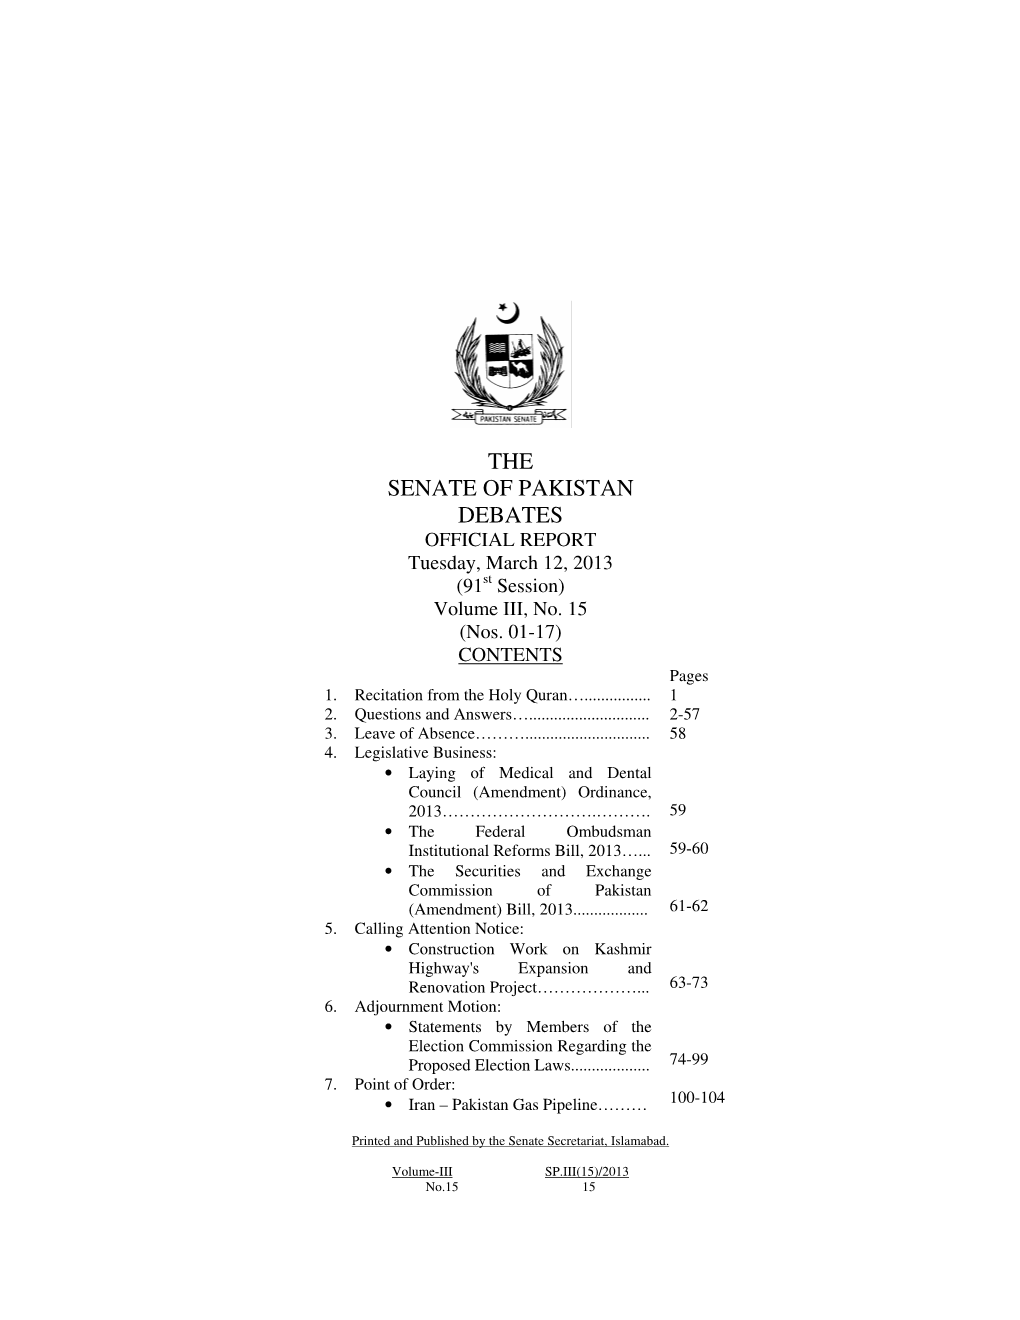 THE SENATE of PAKISTAN DEBATES OFFICIAL REPORT Tuesday, March 12, 2013 (91 St Session) Volume III, No